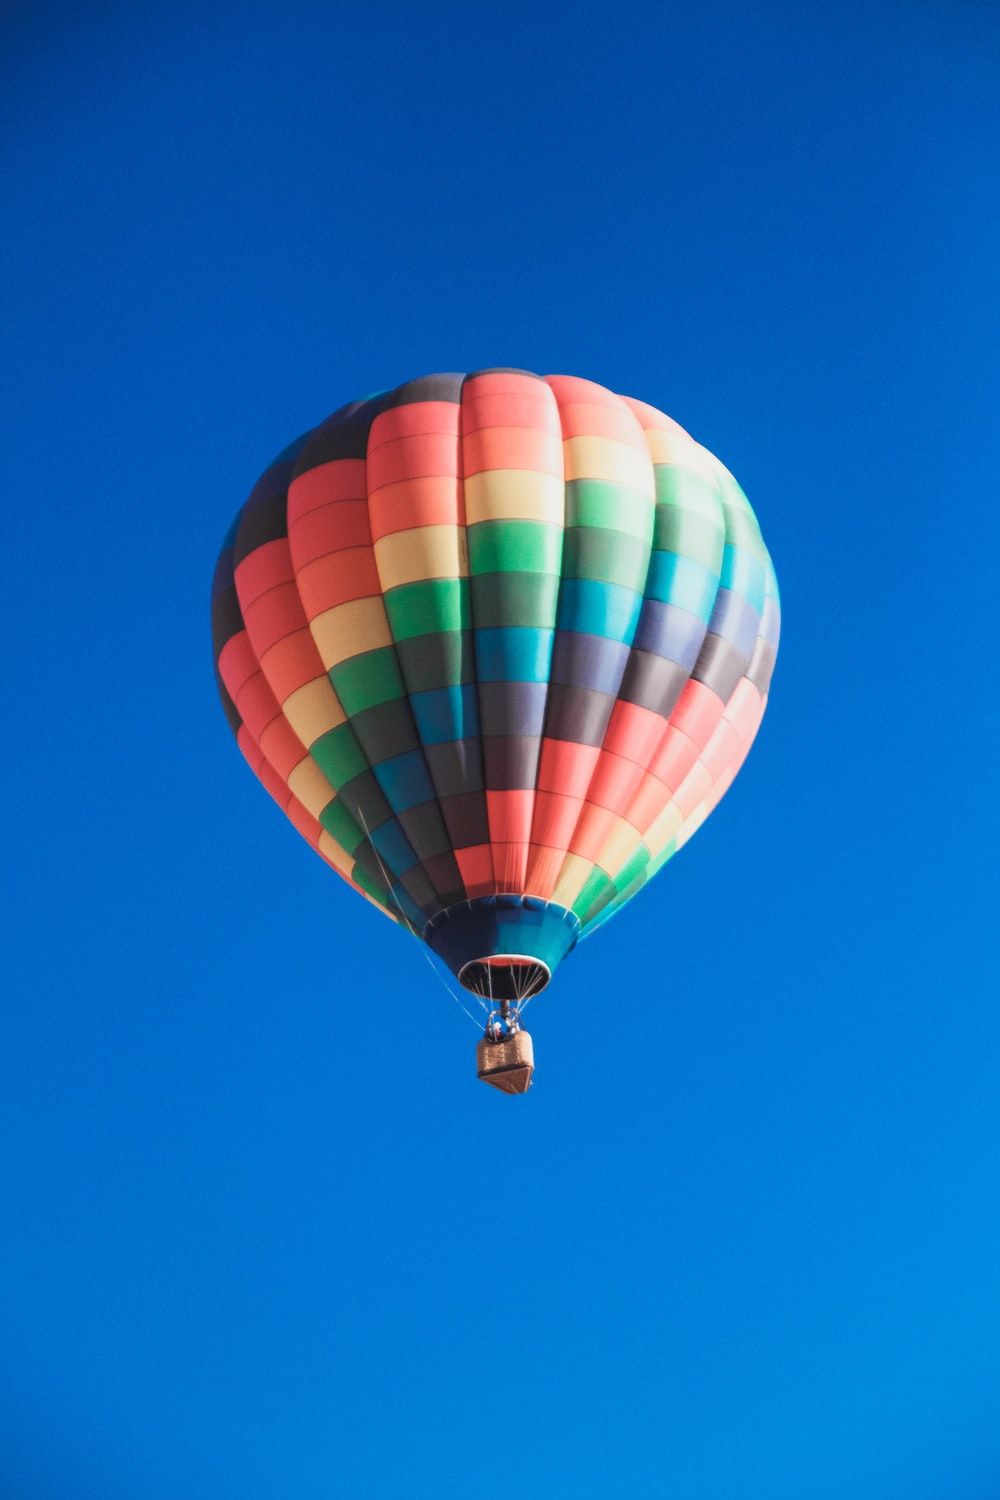 Worm's eye view photography of multicolored hot air balloon photo